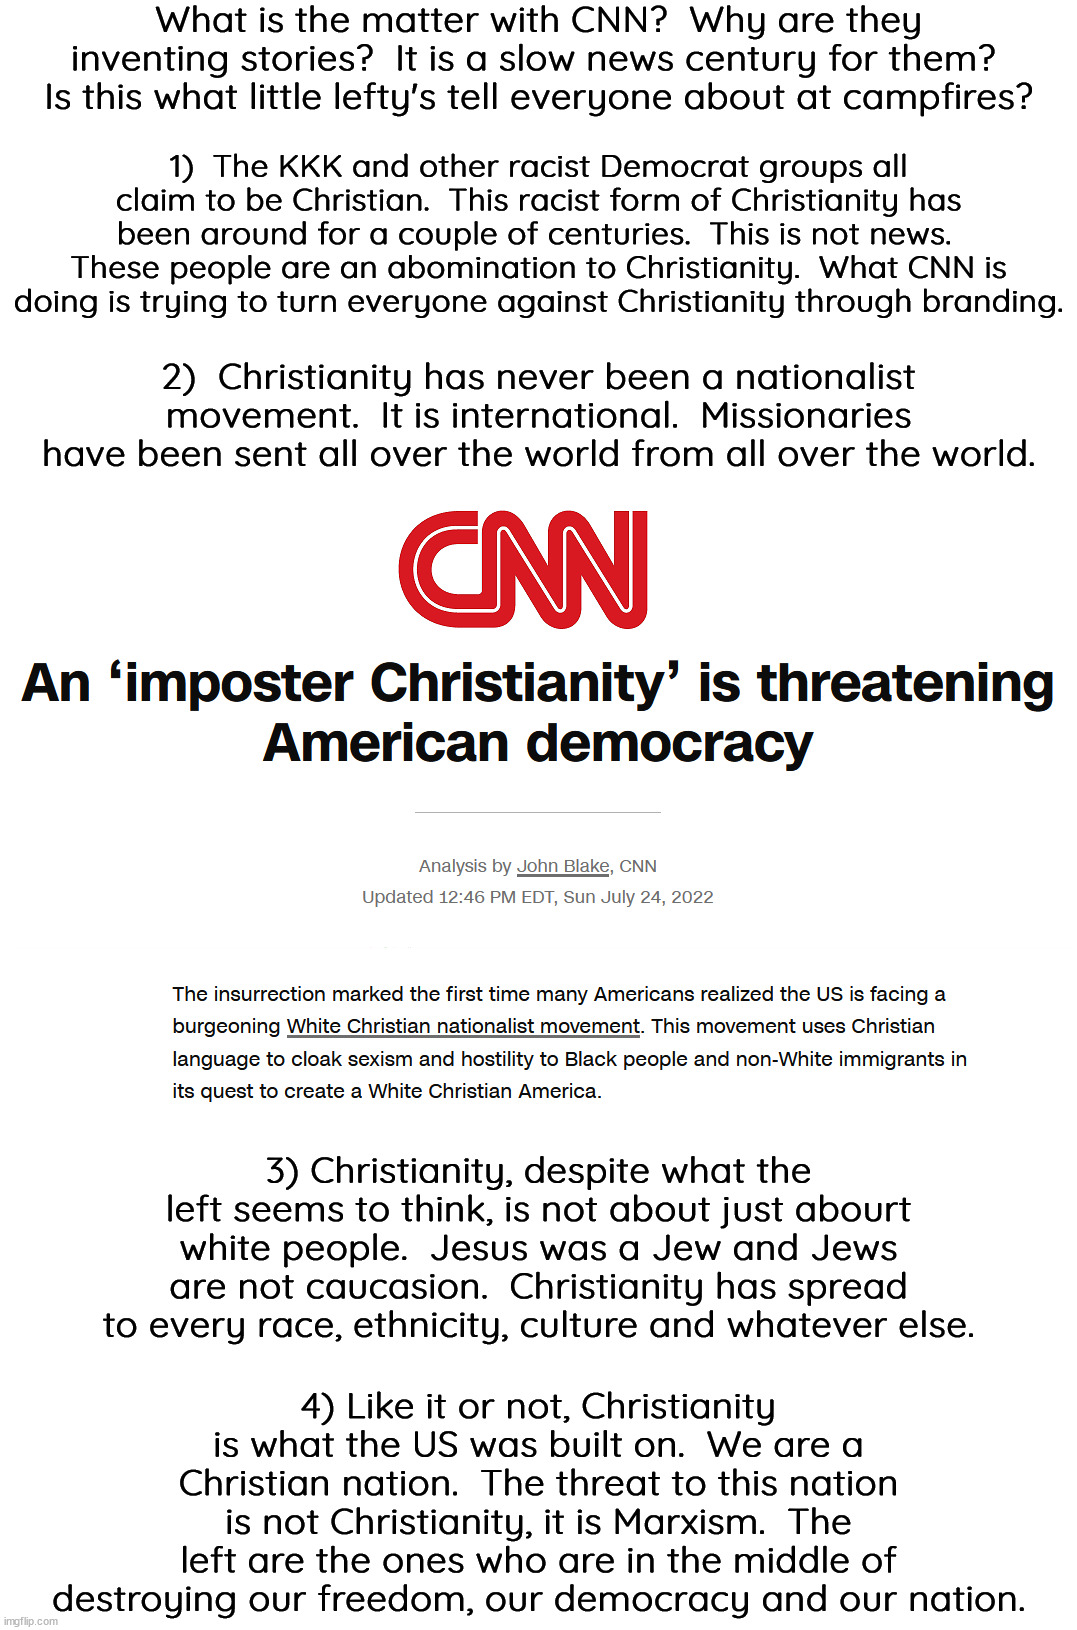 The only enemy destroying this nation are in control of this nation.  Liberal fascism is the enemy. | What is the matter with CNN?  Why are they inventing stories?  It is a slow news century for them?  Is this what little lefty's tell everyone about at campfires? 1)  The KKK and other racist Democrat groups all claim to be Christian.  This racist form of Christianity has been around for a couple of centuries.  This is not news.  These people are an abomination to Christianity.  What CNN is doing is trying to turn everyone against Christianity through branding. 2)  Christianity has never been a nationalist movement.  It is international.  Missionaries have been sent all over the world from all over the world. 3) Christianity, despite what the left seems to think, is not about just abourt white people.  Jesus was a Jew and Jews are not caucasion.  Christianity has spread to every race, ethnicity, culture and whatever else. 4) Like it or not, Christianity is what the US was built on.  We are a Christian nation.  The threat to this nation is not Christianity, it is Marxism.  The left are the ones who are in the middle of destroying our freedom, our democracy and our nation. | image tagged in christianity,america is a christian nation,liberal fascism is destroying america | made w/ Imgflip meme maker